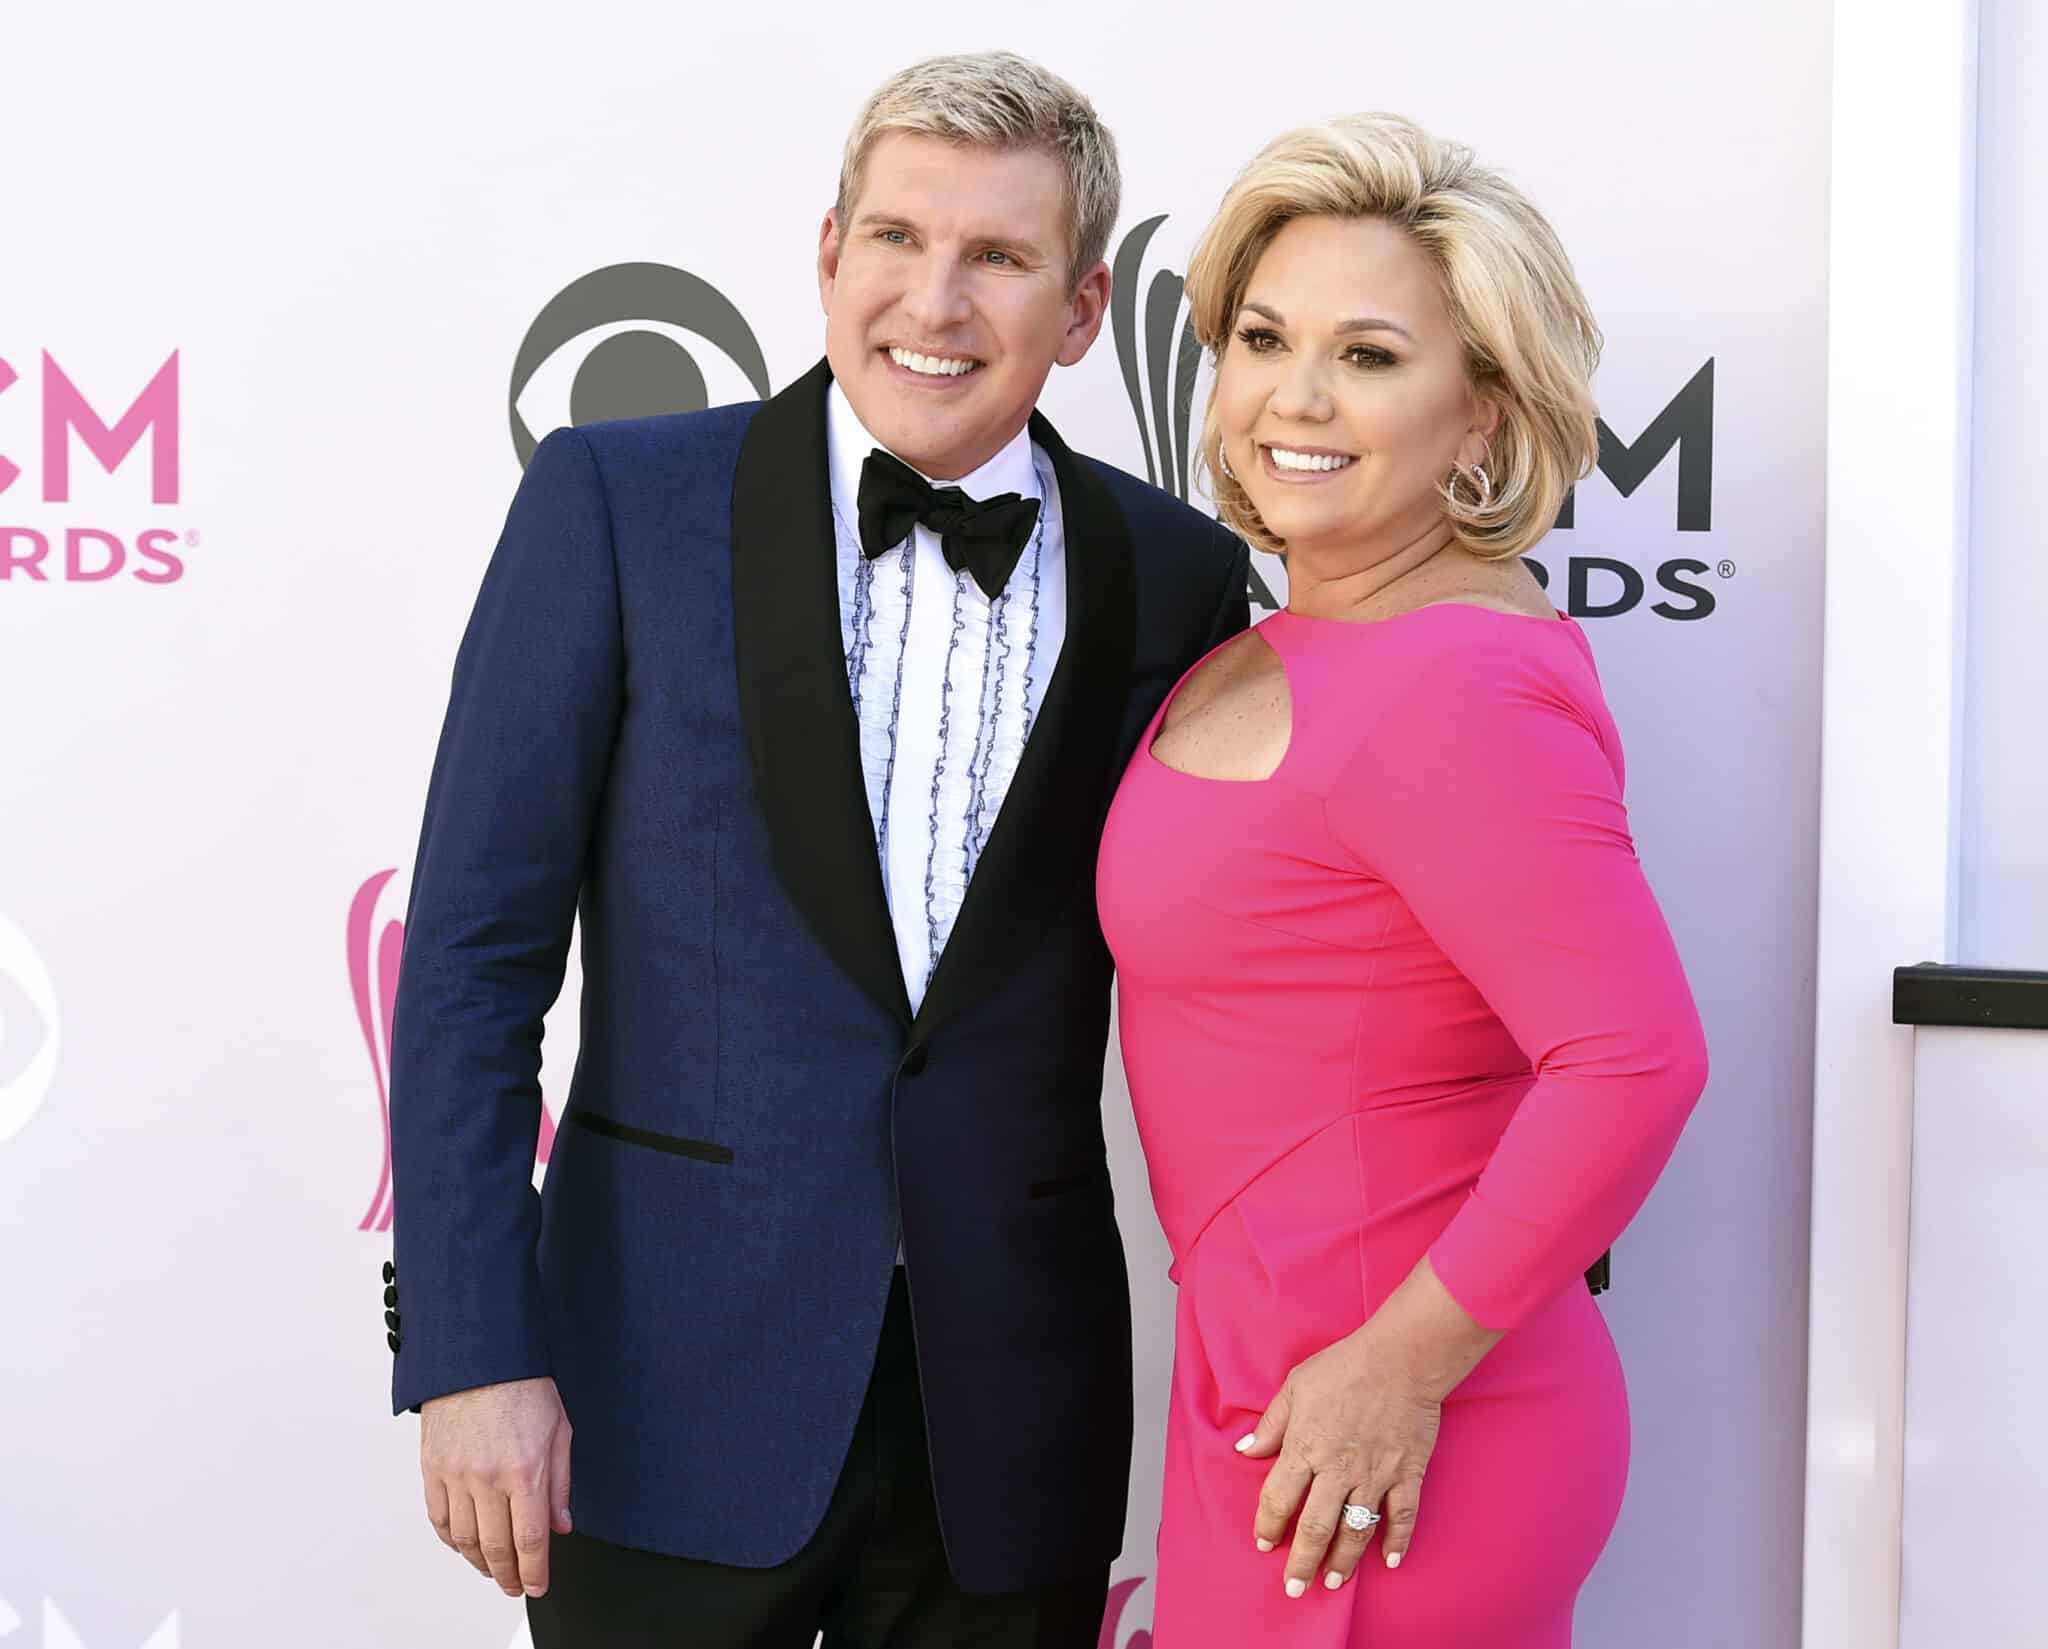 FILE - Todd Chrisley, left, and his wife, Julie Chrisley, pose for photos at the 52nd annual Academy of Country Music Awards on April 2, 2017, in Las Vegas. The couple, stars of the reality television show “Chrisley Knows Best,” have been found guilty in Atlanta on federal charges including bank fraud and tax evasion Tuesday, June 7, 2022. (Photo by Jordan Strauss/Invision/AP, File)